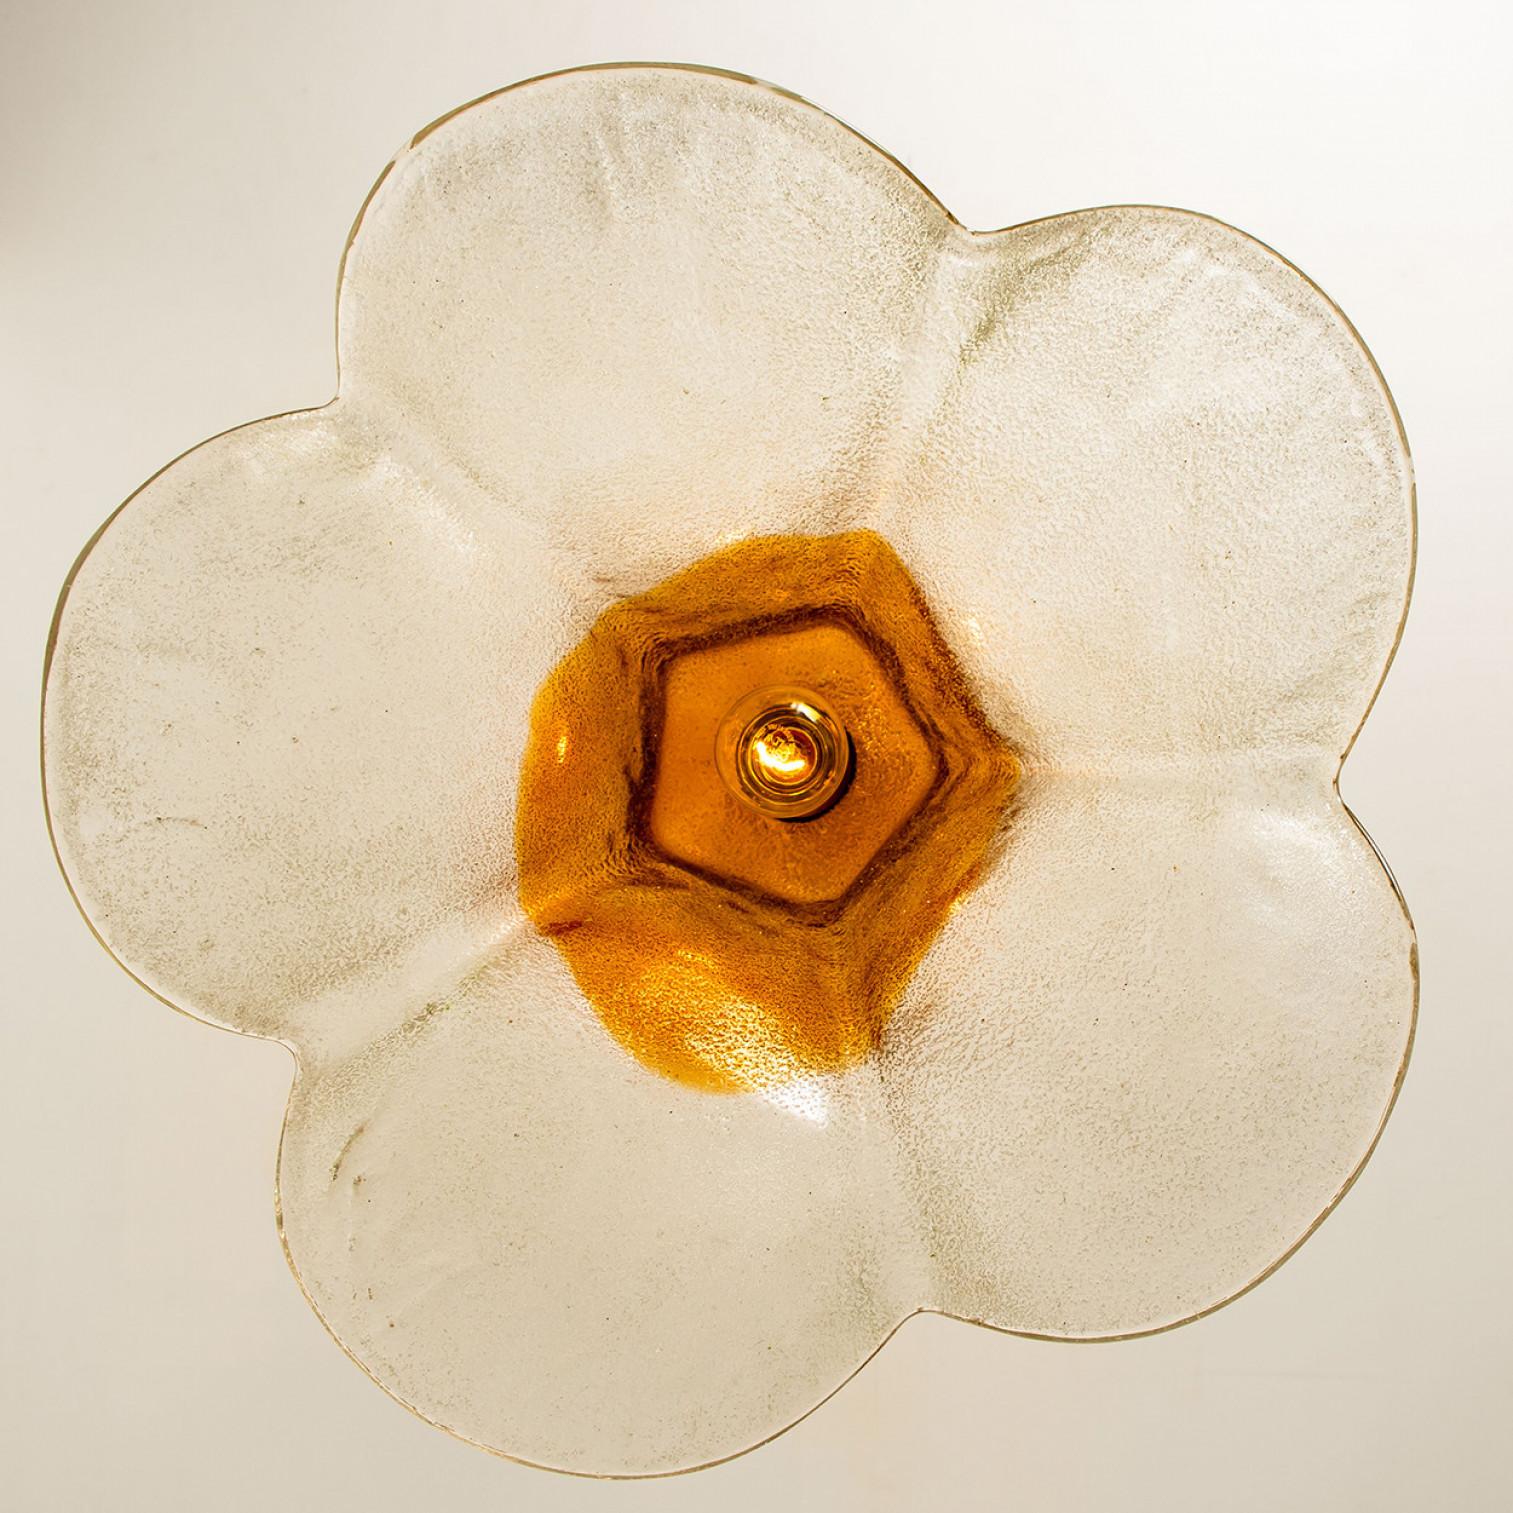 Pendant lamp model LS185 by Carlo Nason for Mazzega.
One large crystal clear and orange colored flower. This beautiful piece is made of thick handmade Murano glass.

We can deliver different kind of rods and cords (see images). Please notice the